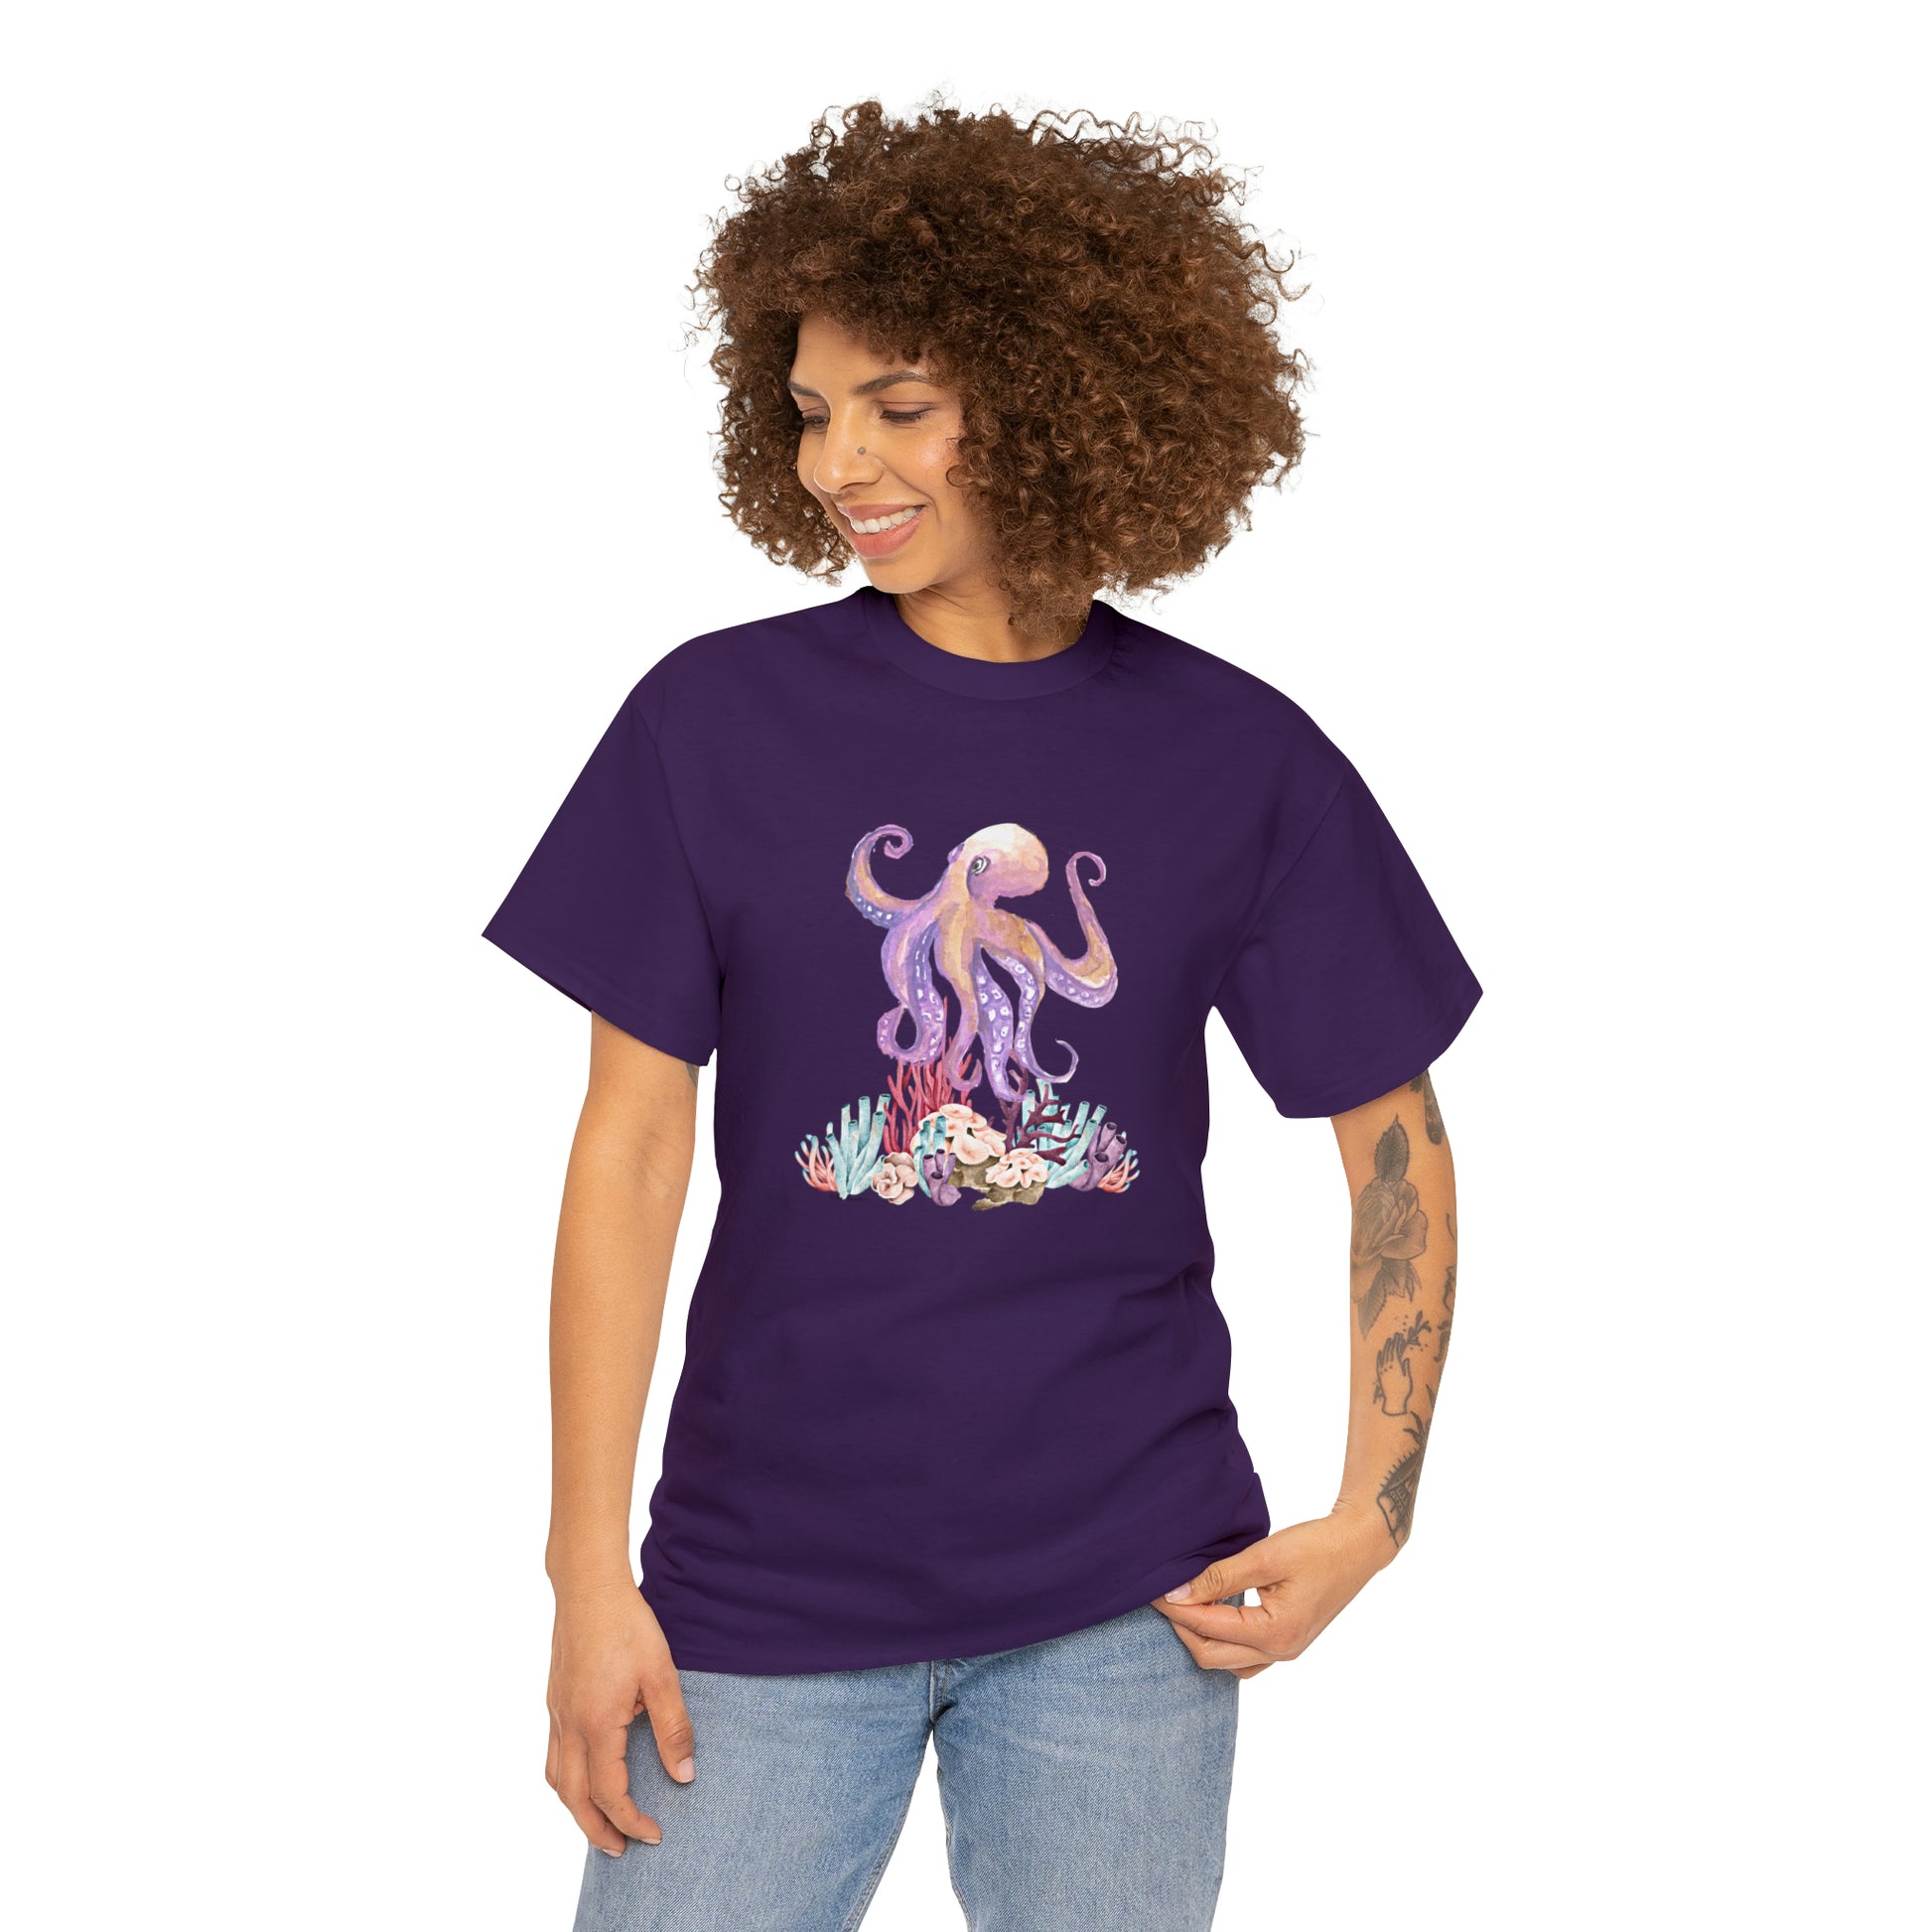 Mock up of a dark-haired woman wearing the Purple shirt